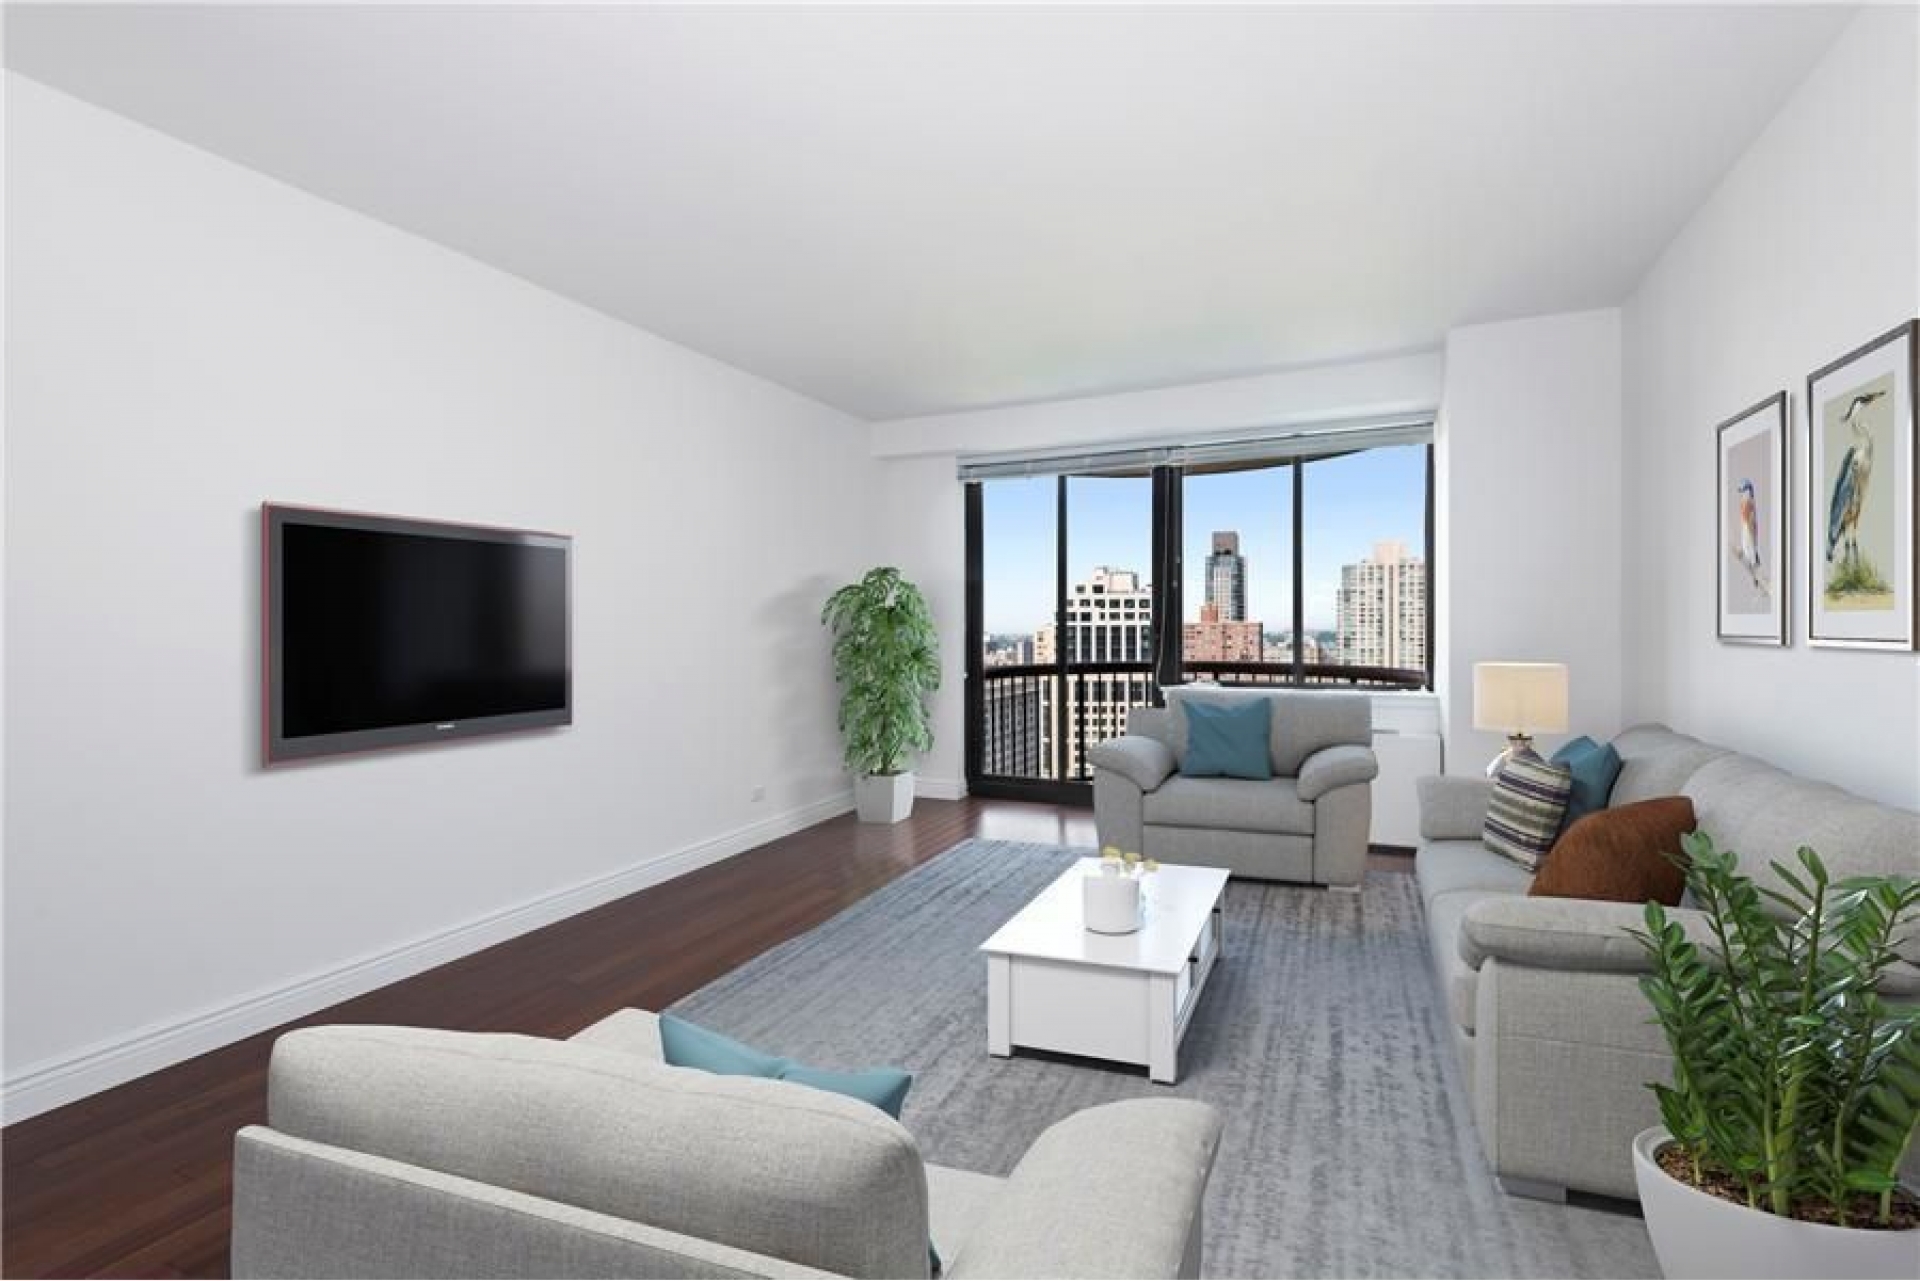 Dotta 2 rooms apartment for sale - THE STANFORD - Nomad - New York  - img396035580